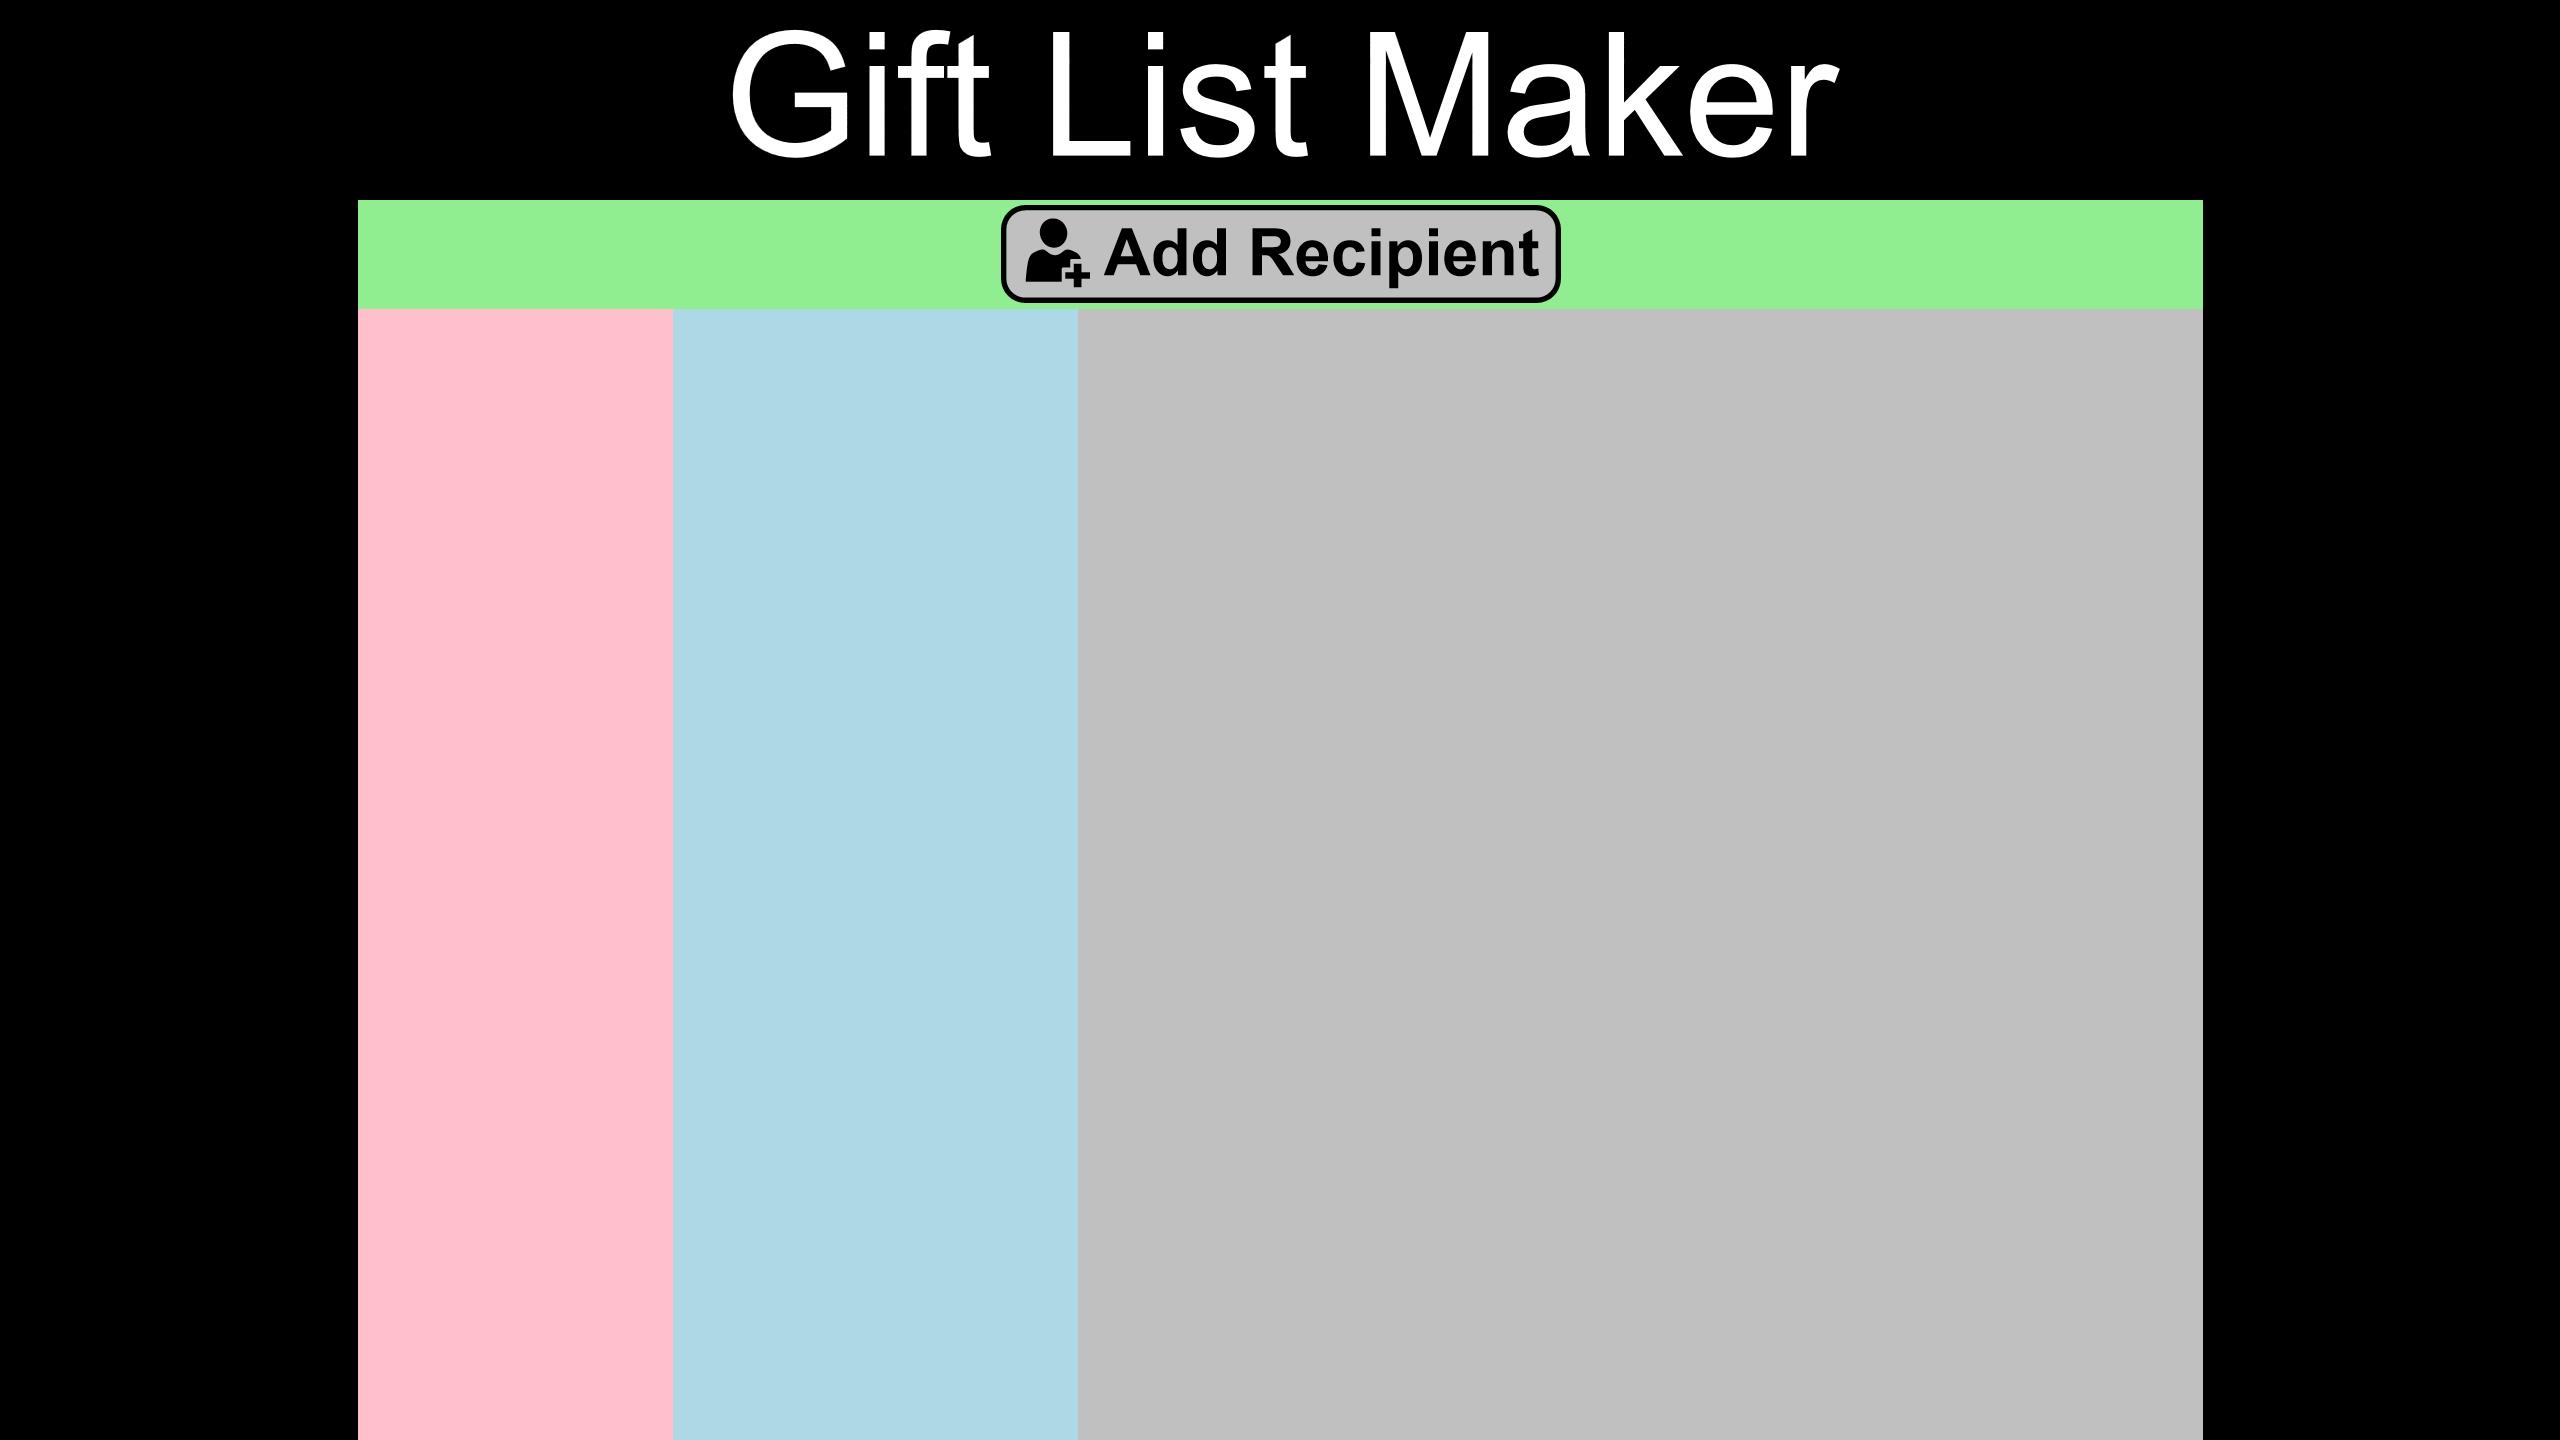 Gift List Maker has a simple interface